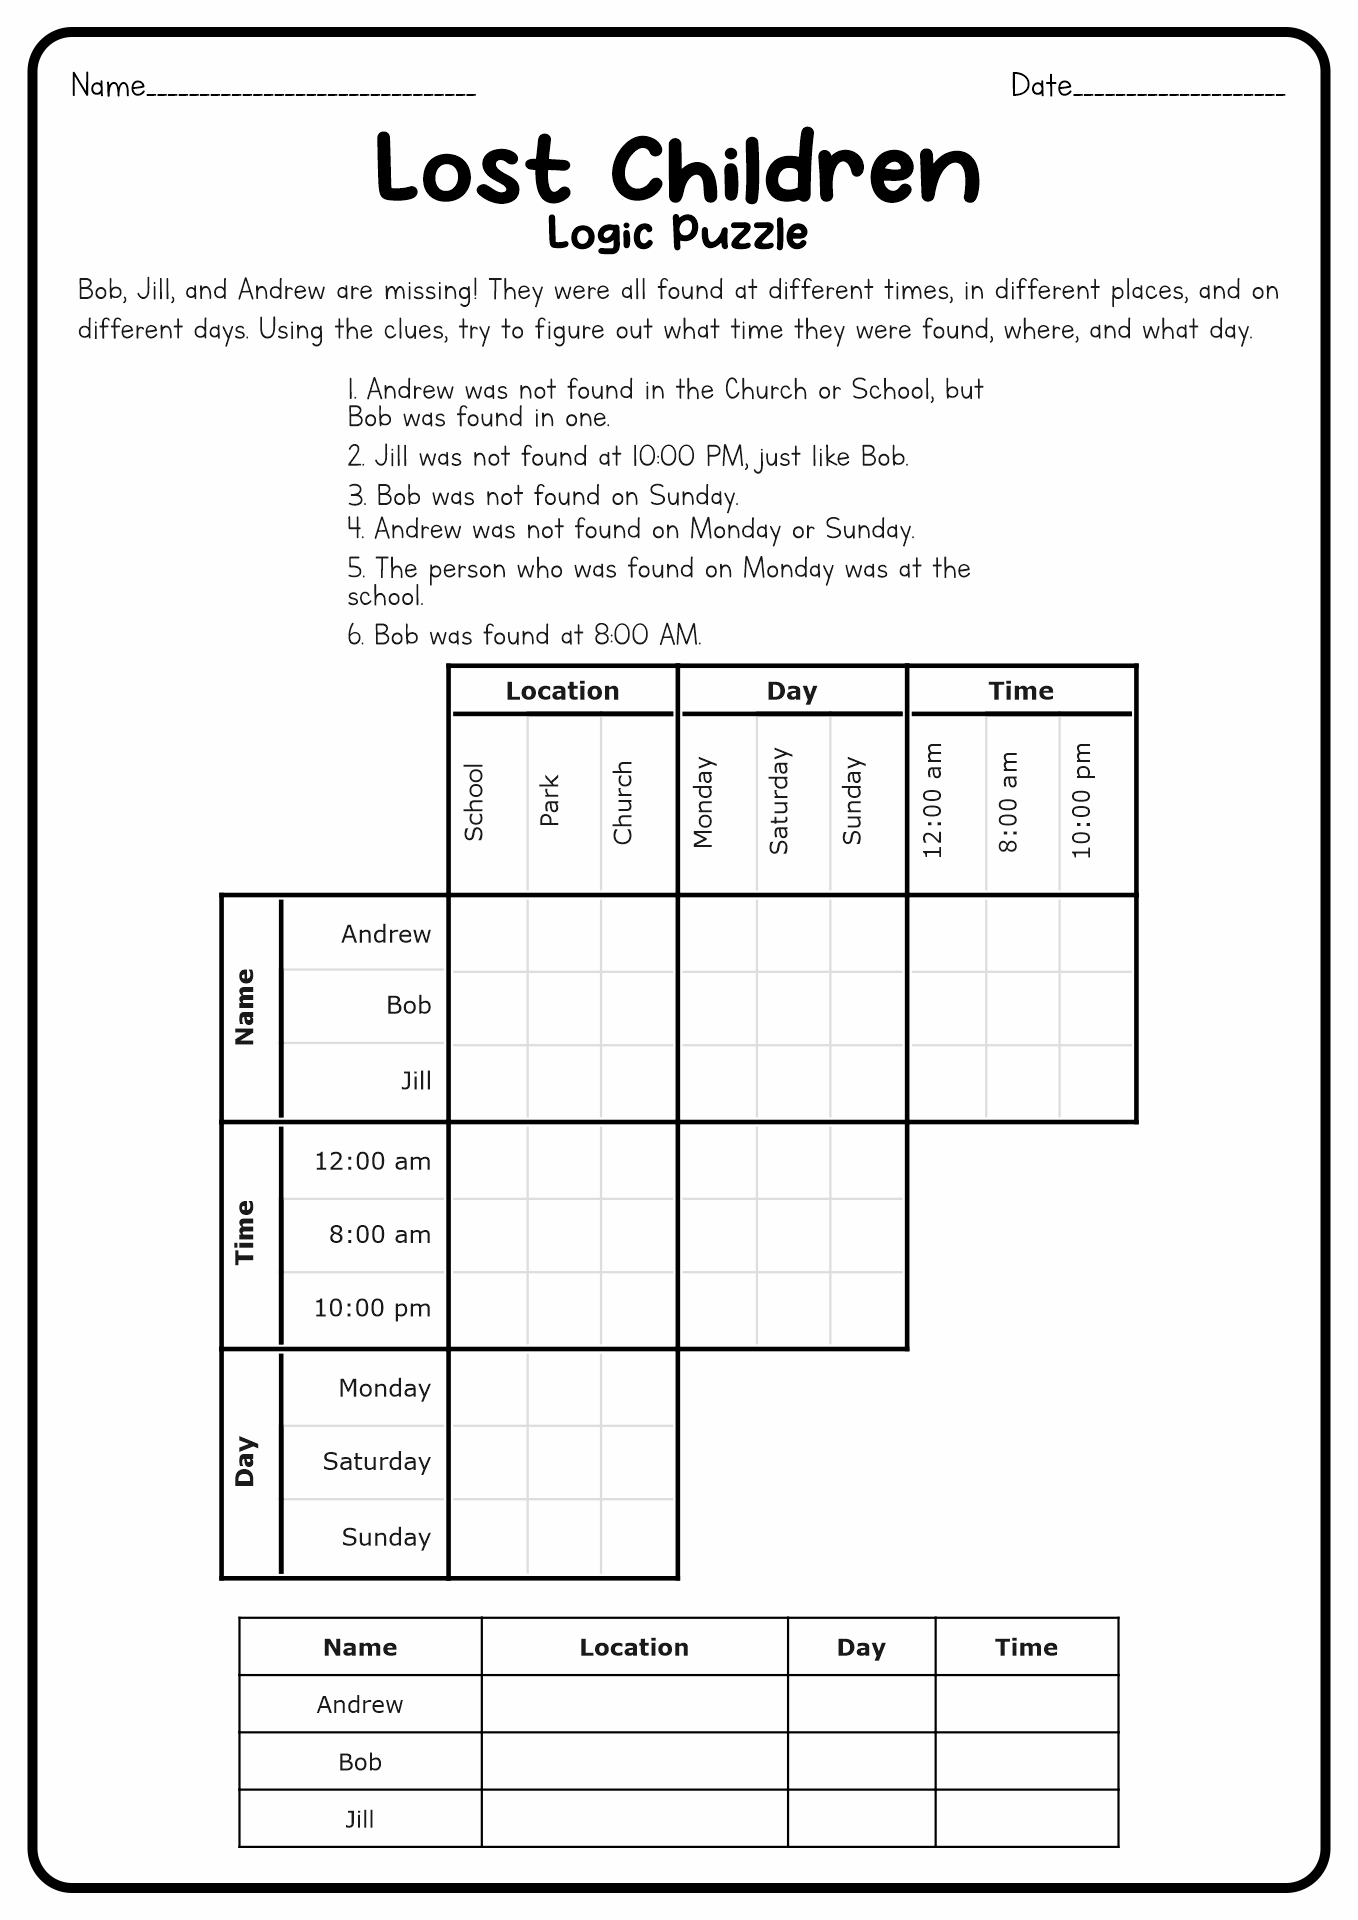 printable-logic-puzzles-free-customize-and-print